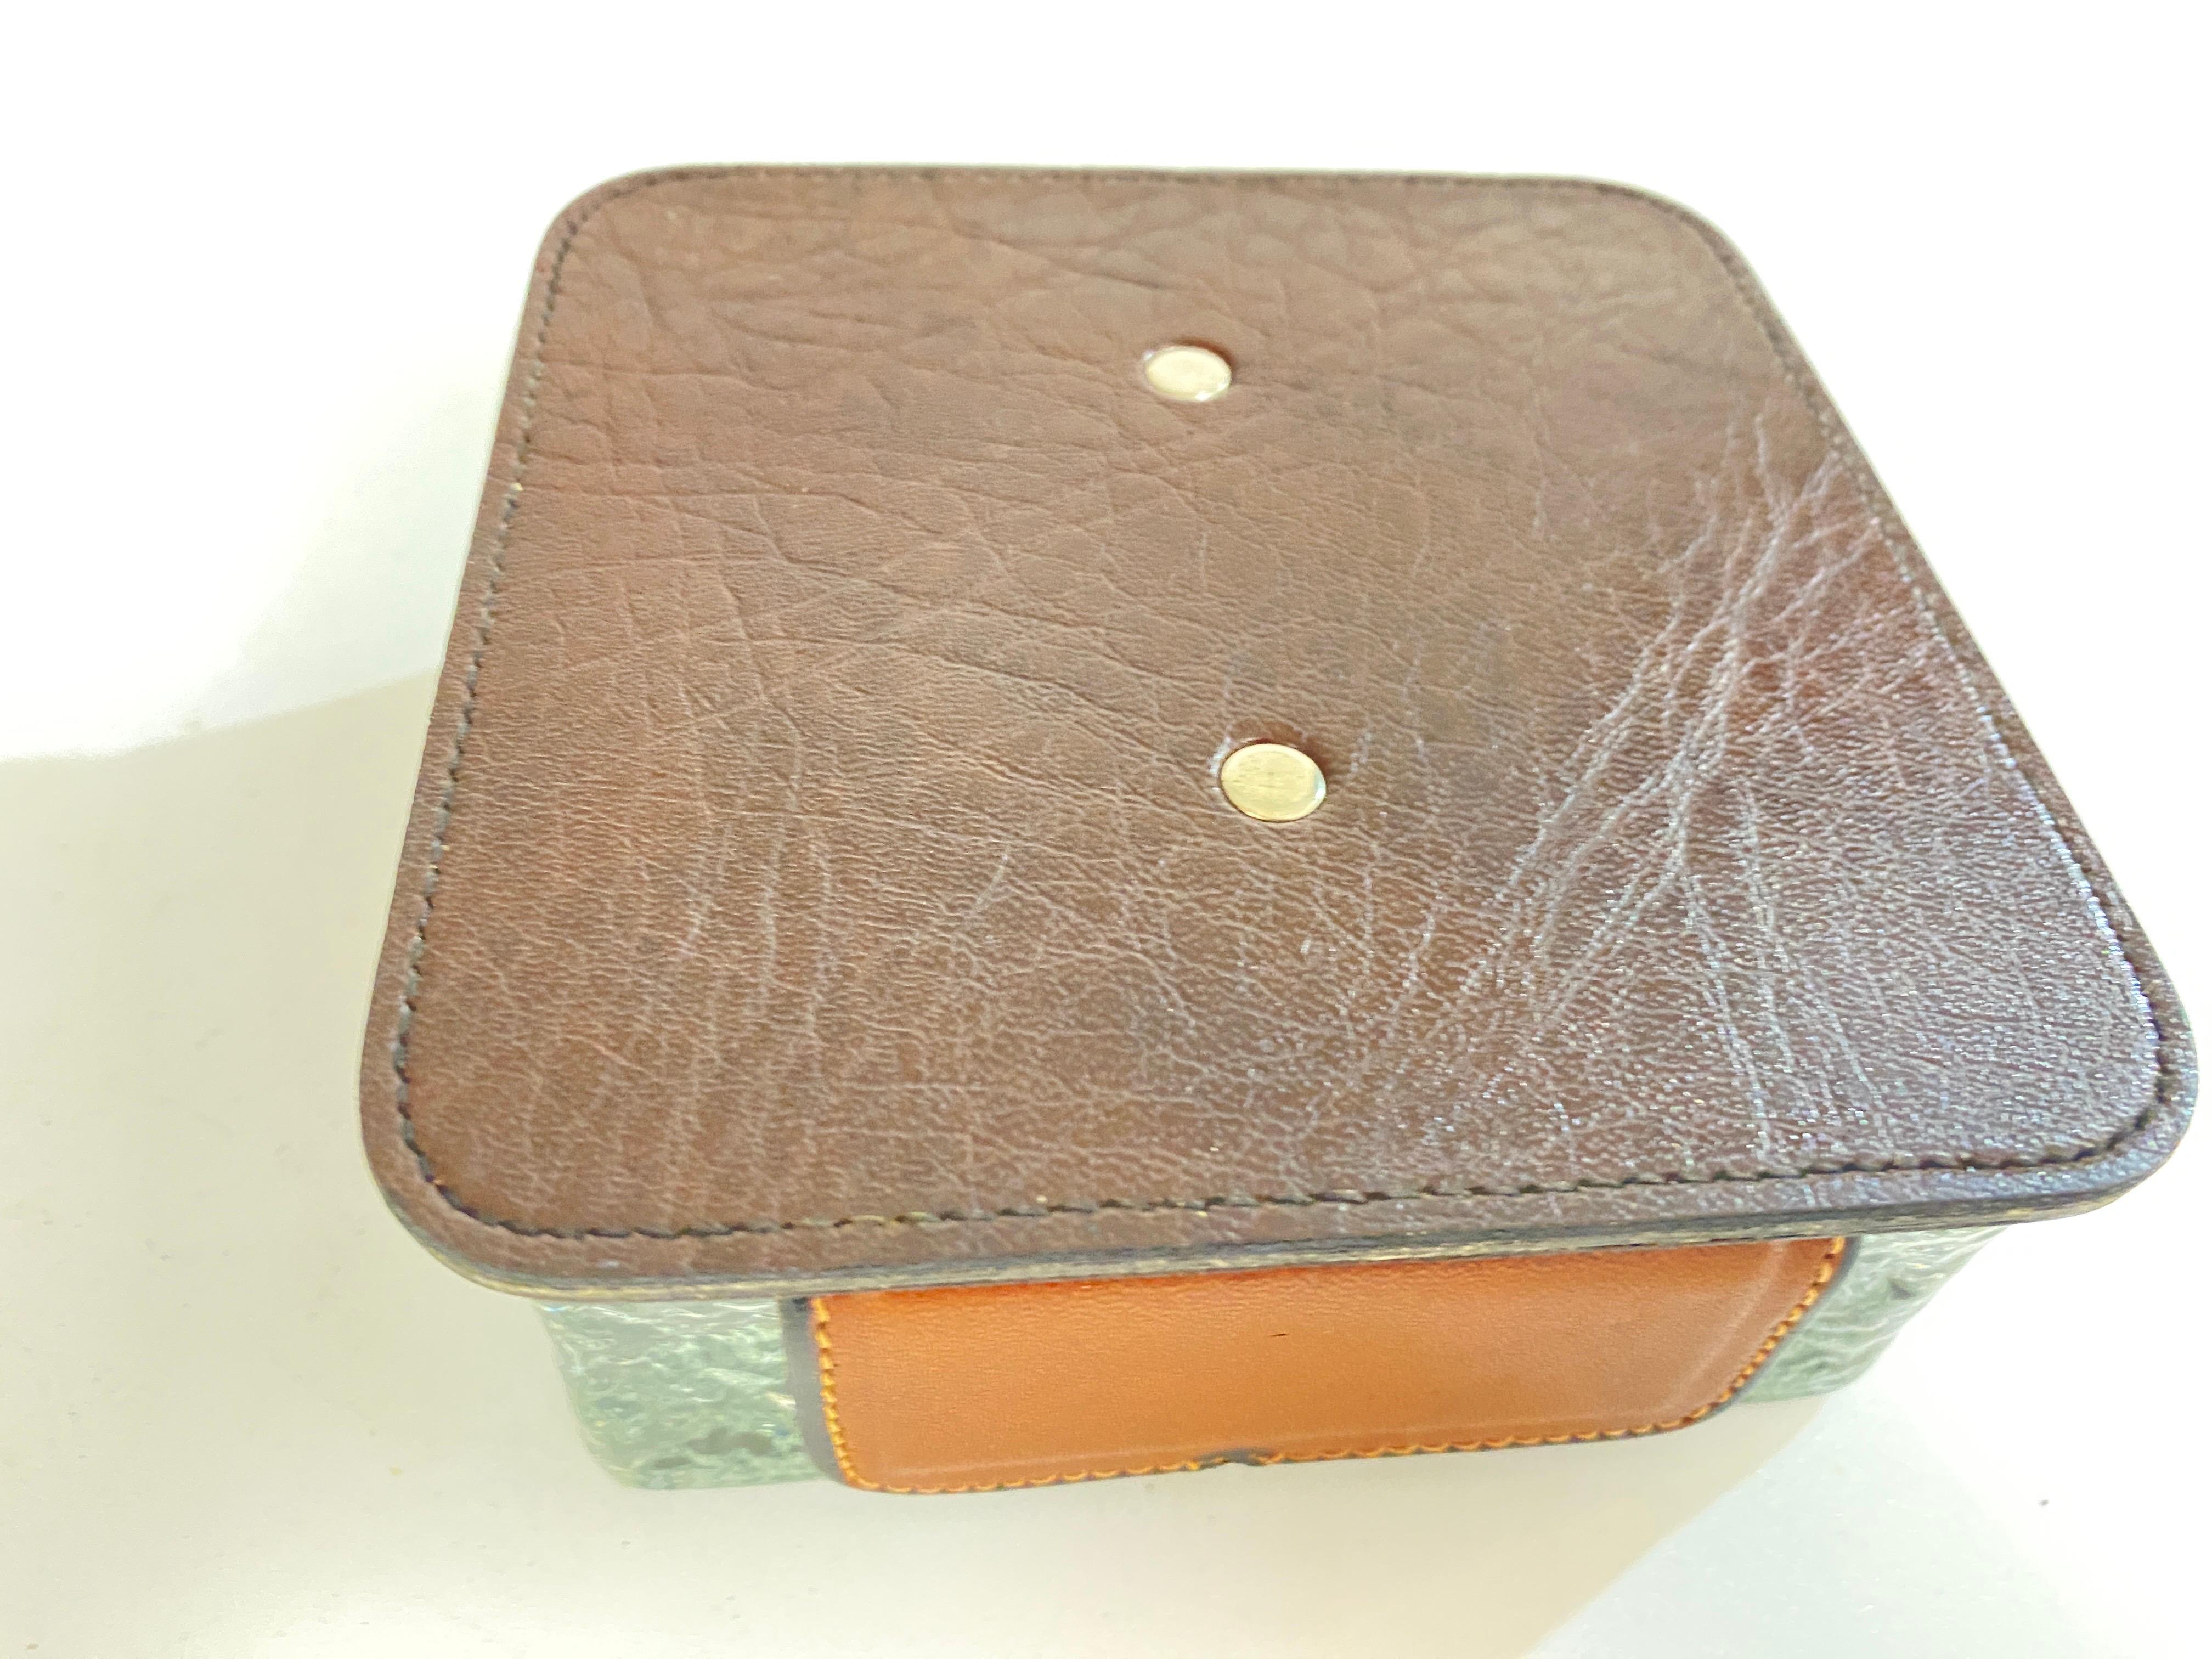 Mid-Century Modern Ashtray in Glass with a Stitched Leather Cover, Brown Color, France 1970 For Sale